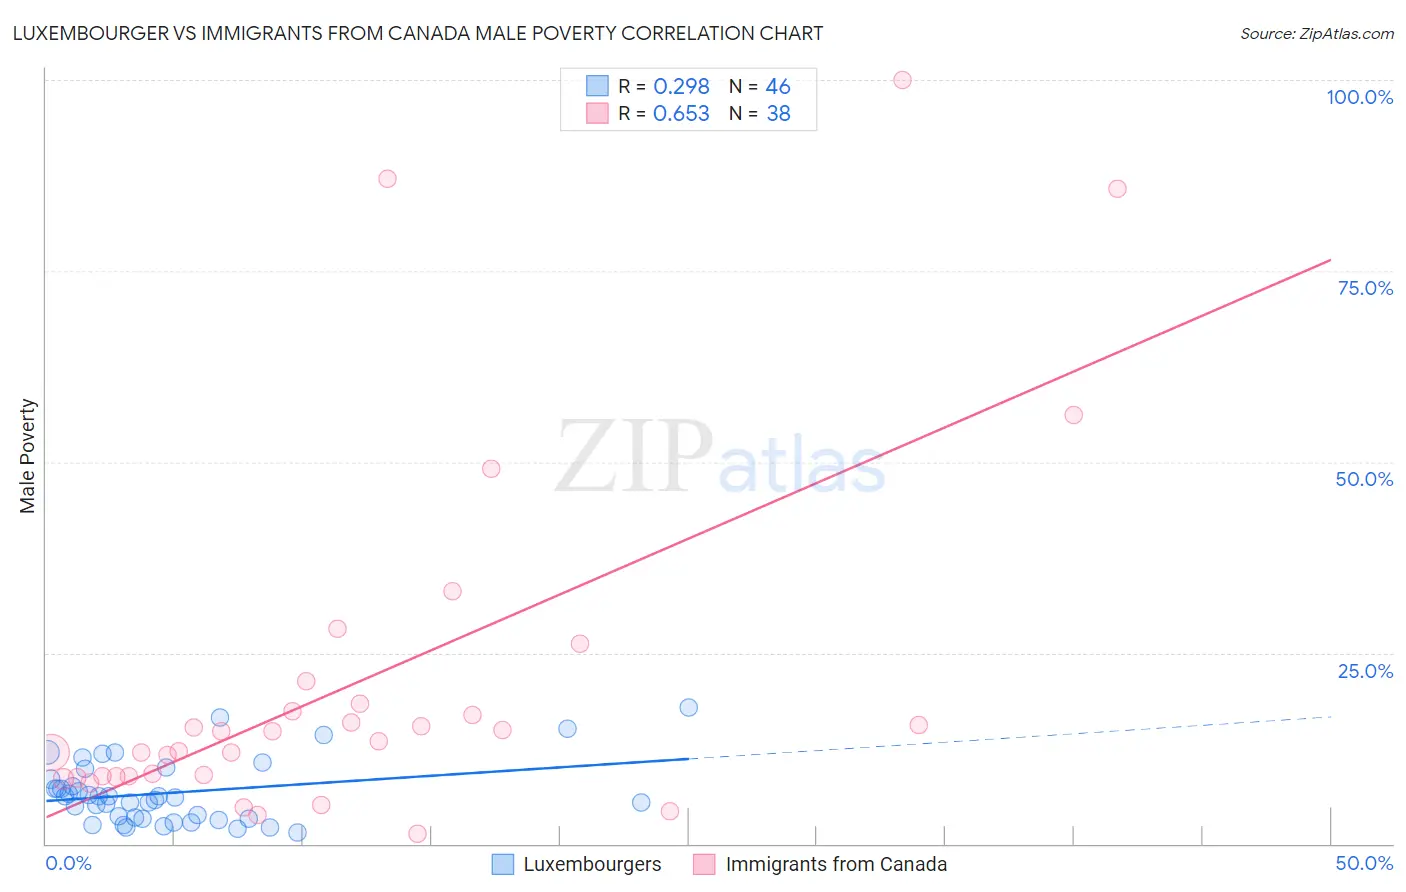 Luxembourger vs Immigrants from Canada Male Poverty